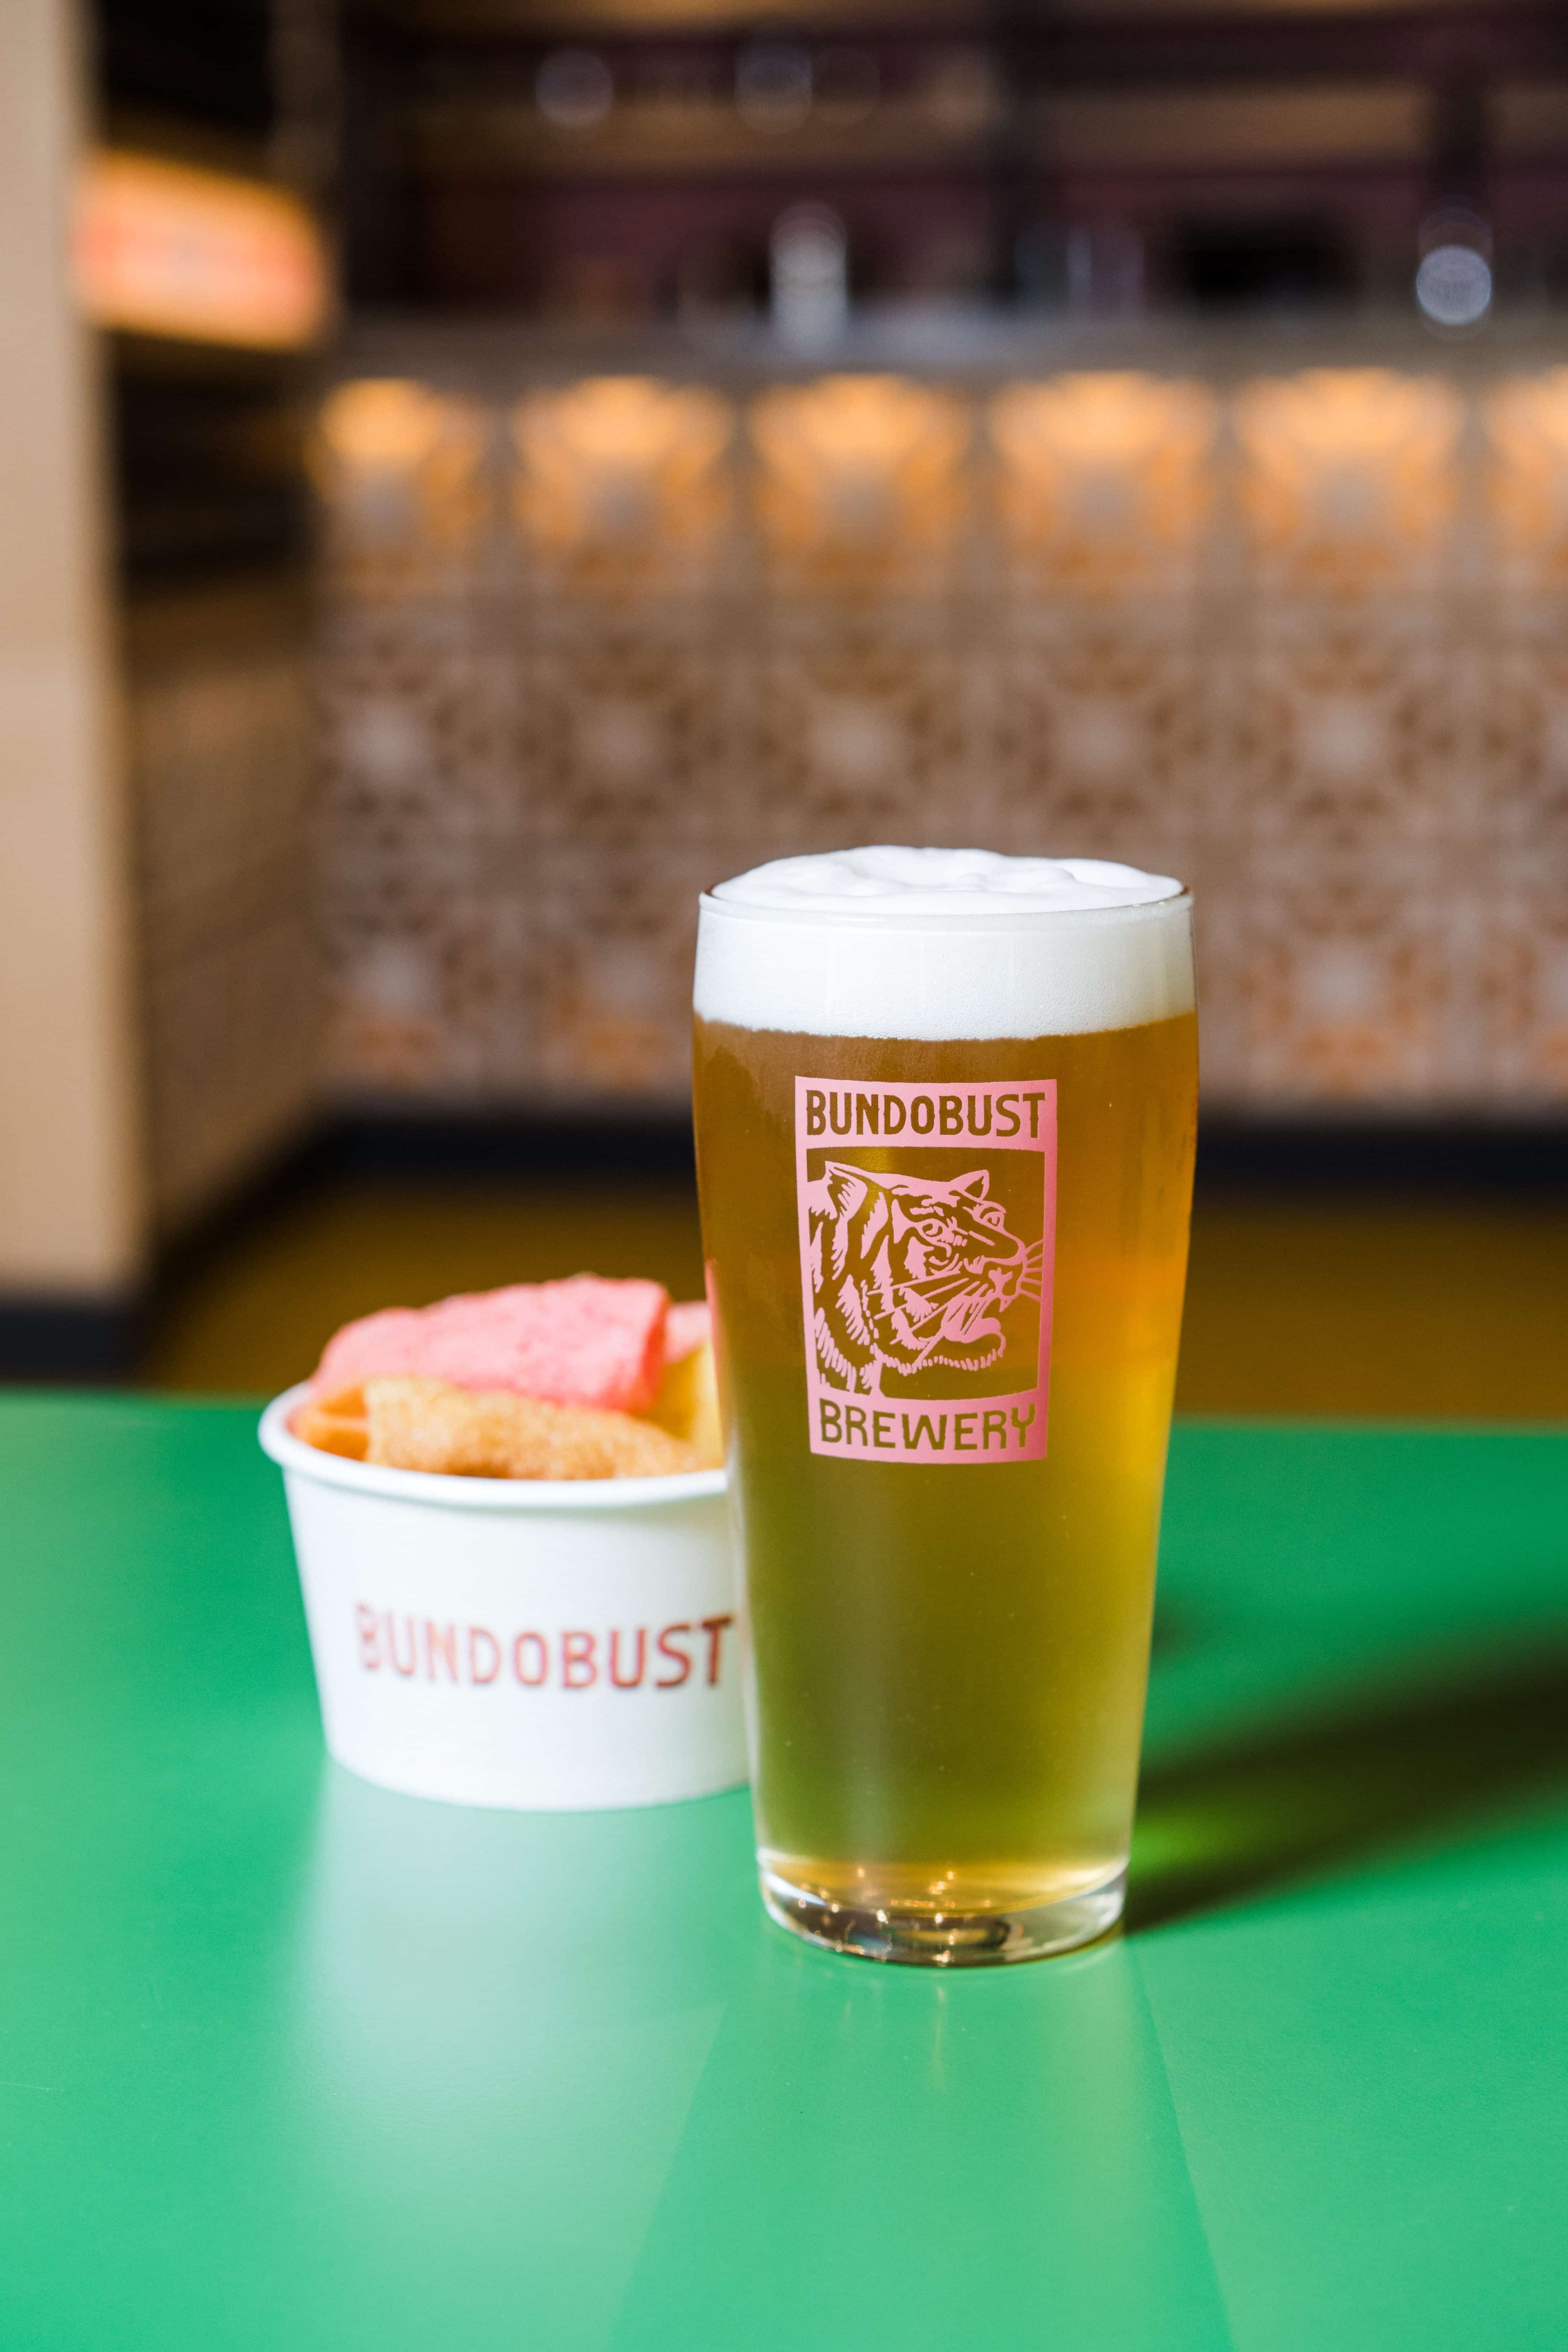 A pot of Indian street food and a pint of craft beer from Bundobust